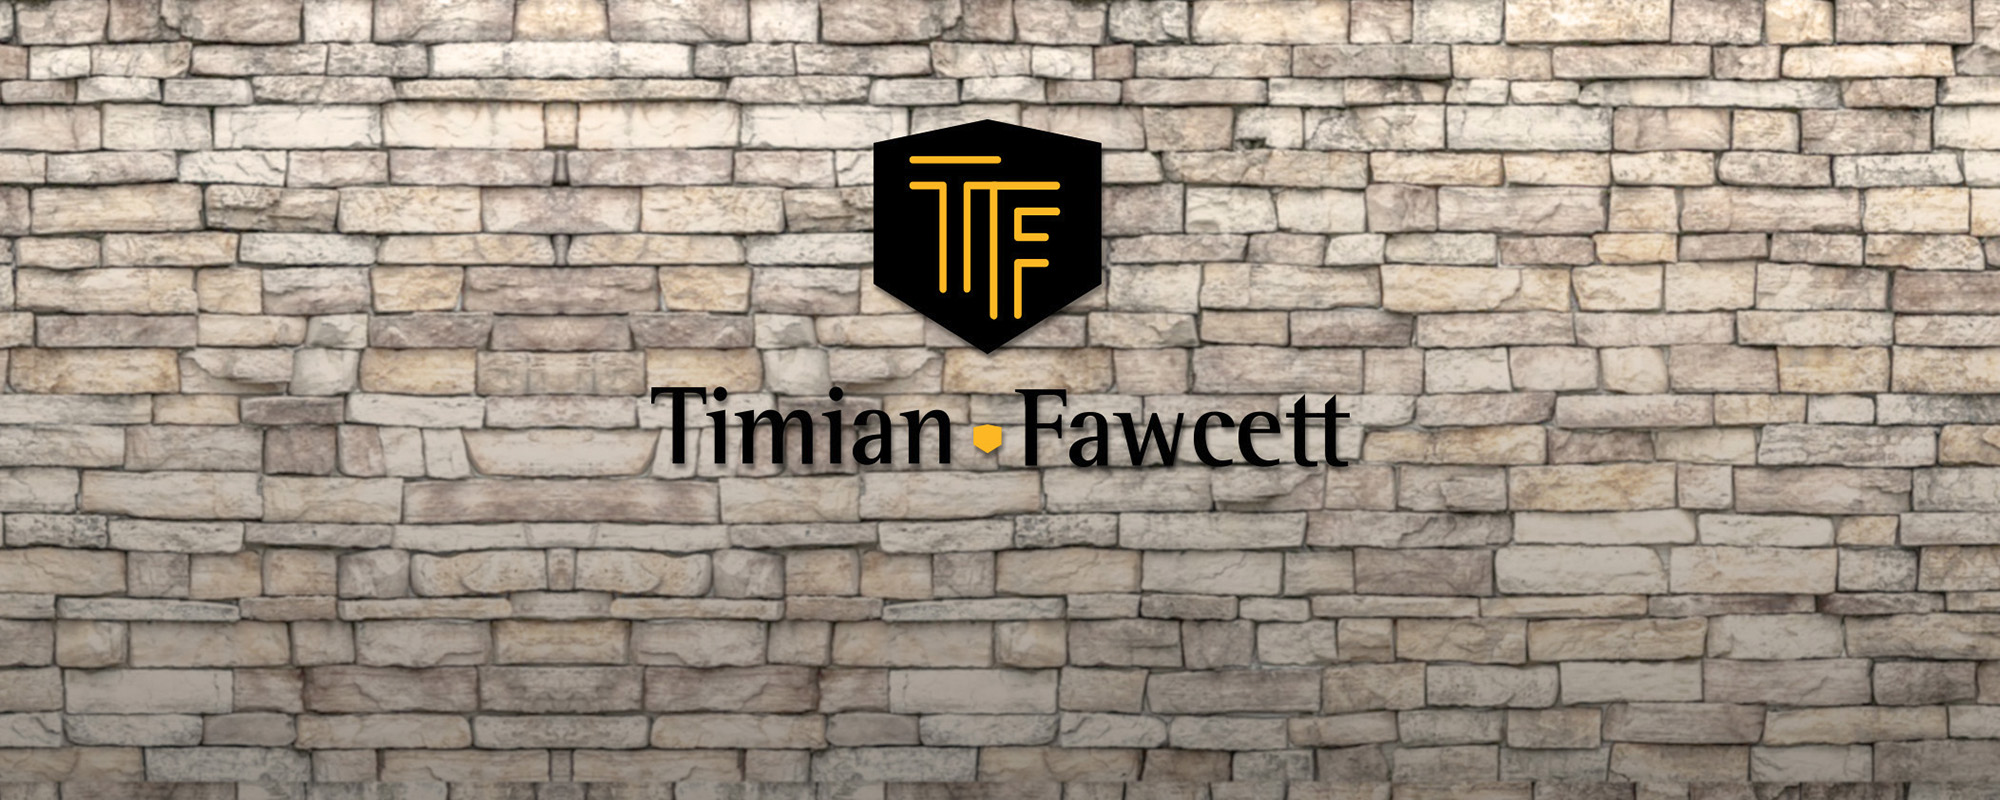 timian fawcett sign on stone wall texture background